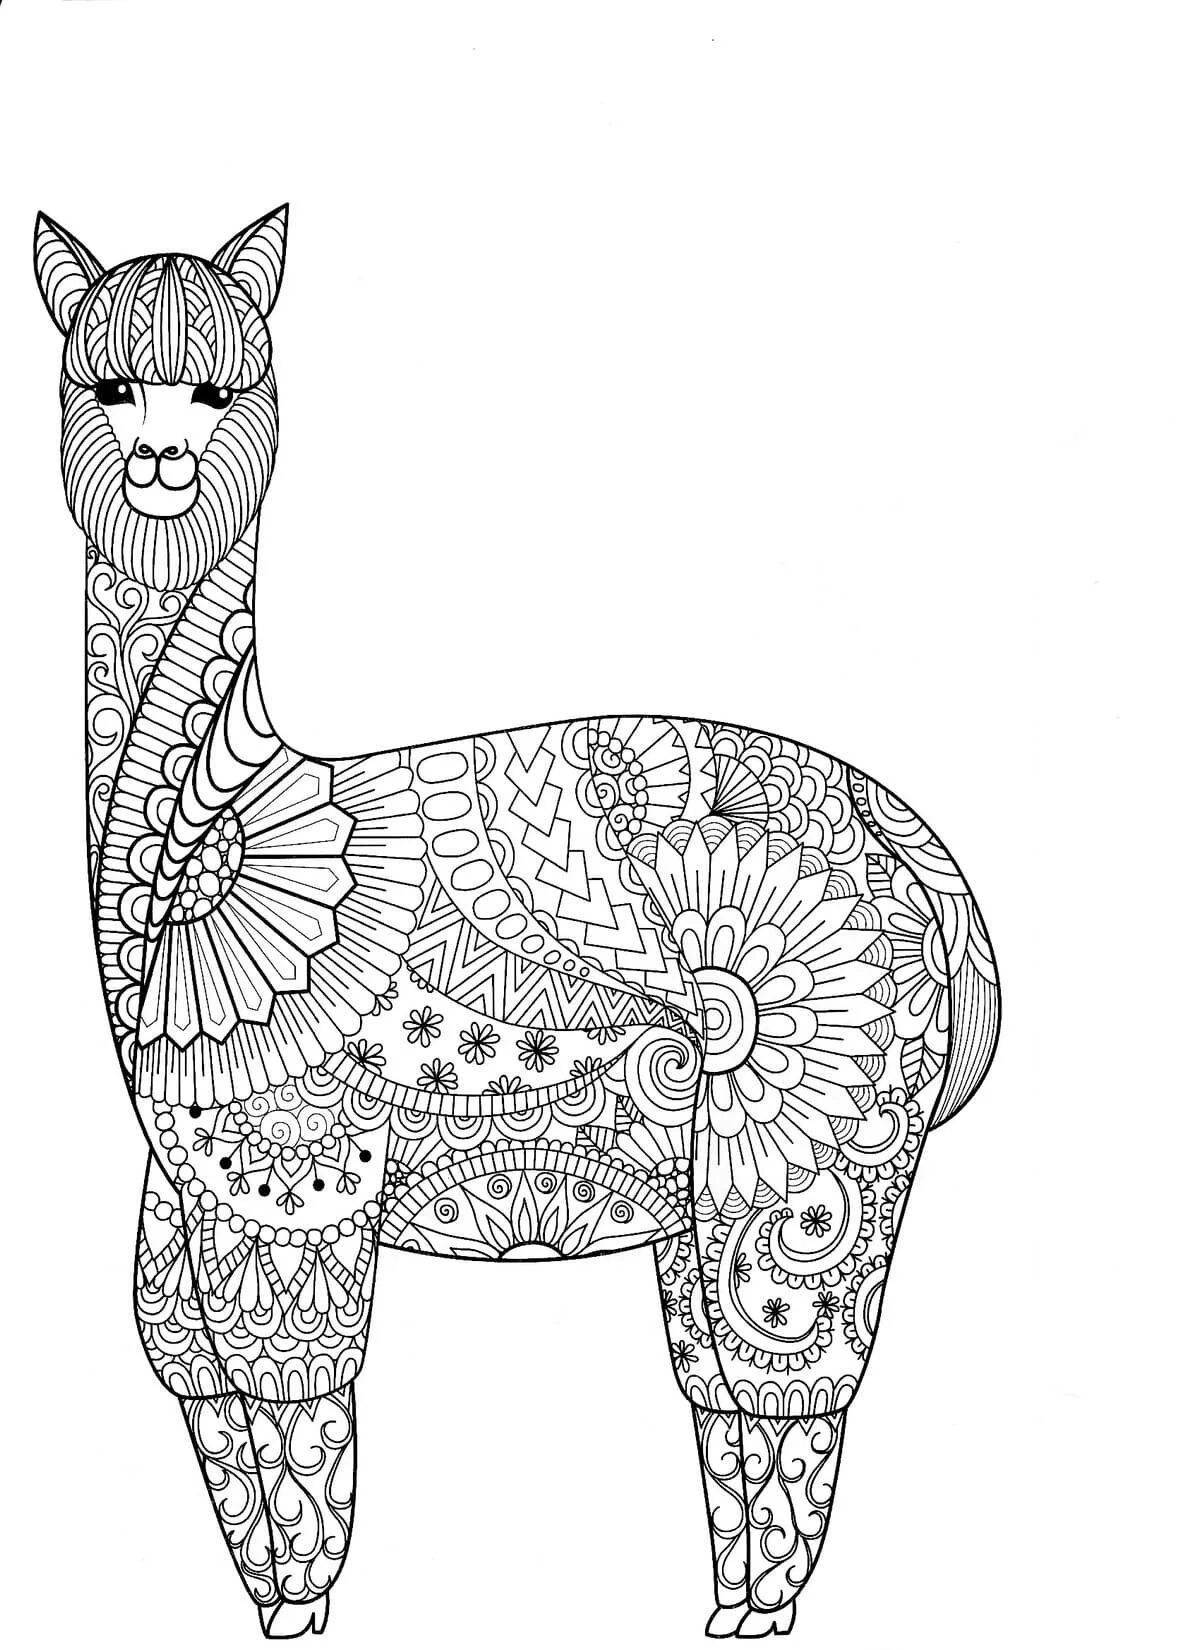 Great animal coloring book for adults